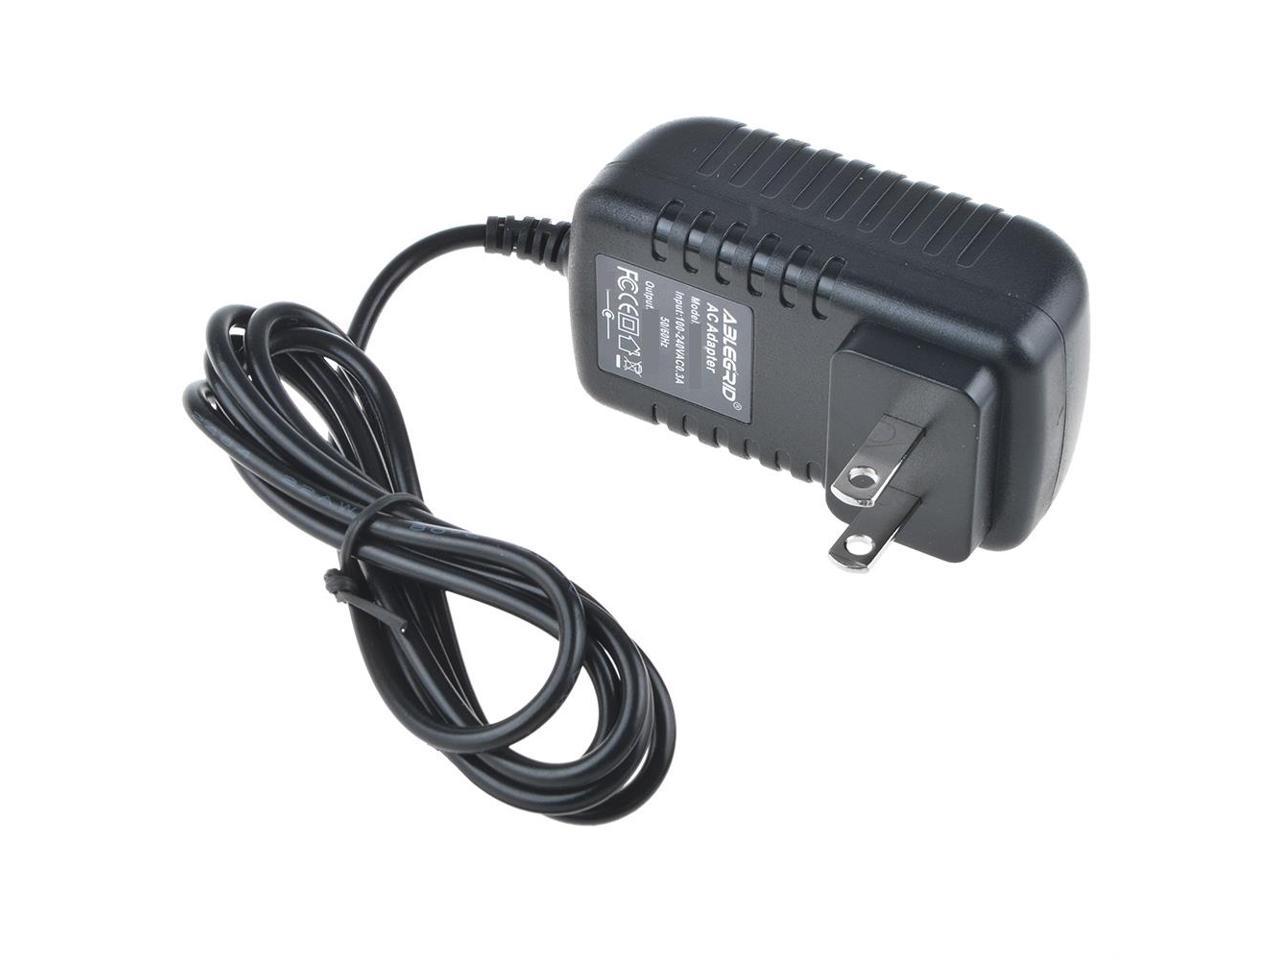 24V AC/DC Adapter For APD Asian Power Devices Inc DA-50C24 I.T.E Power Charger 